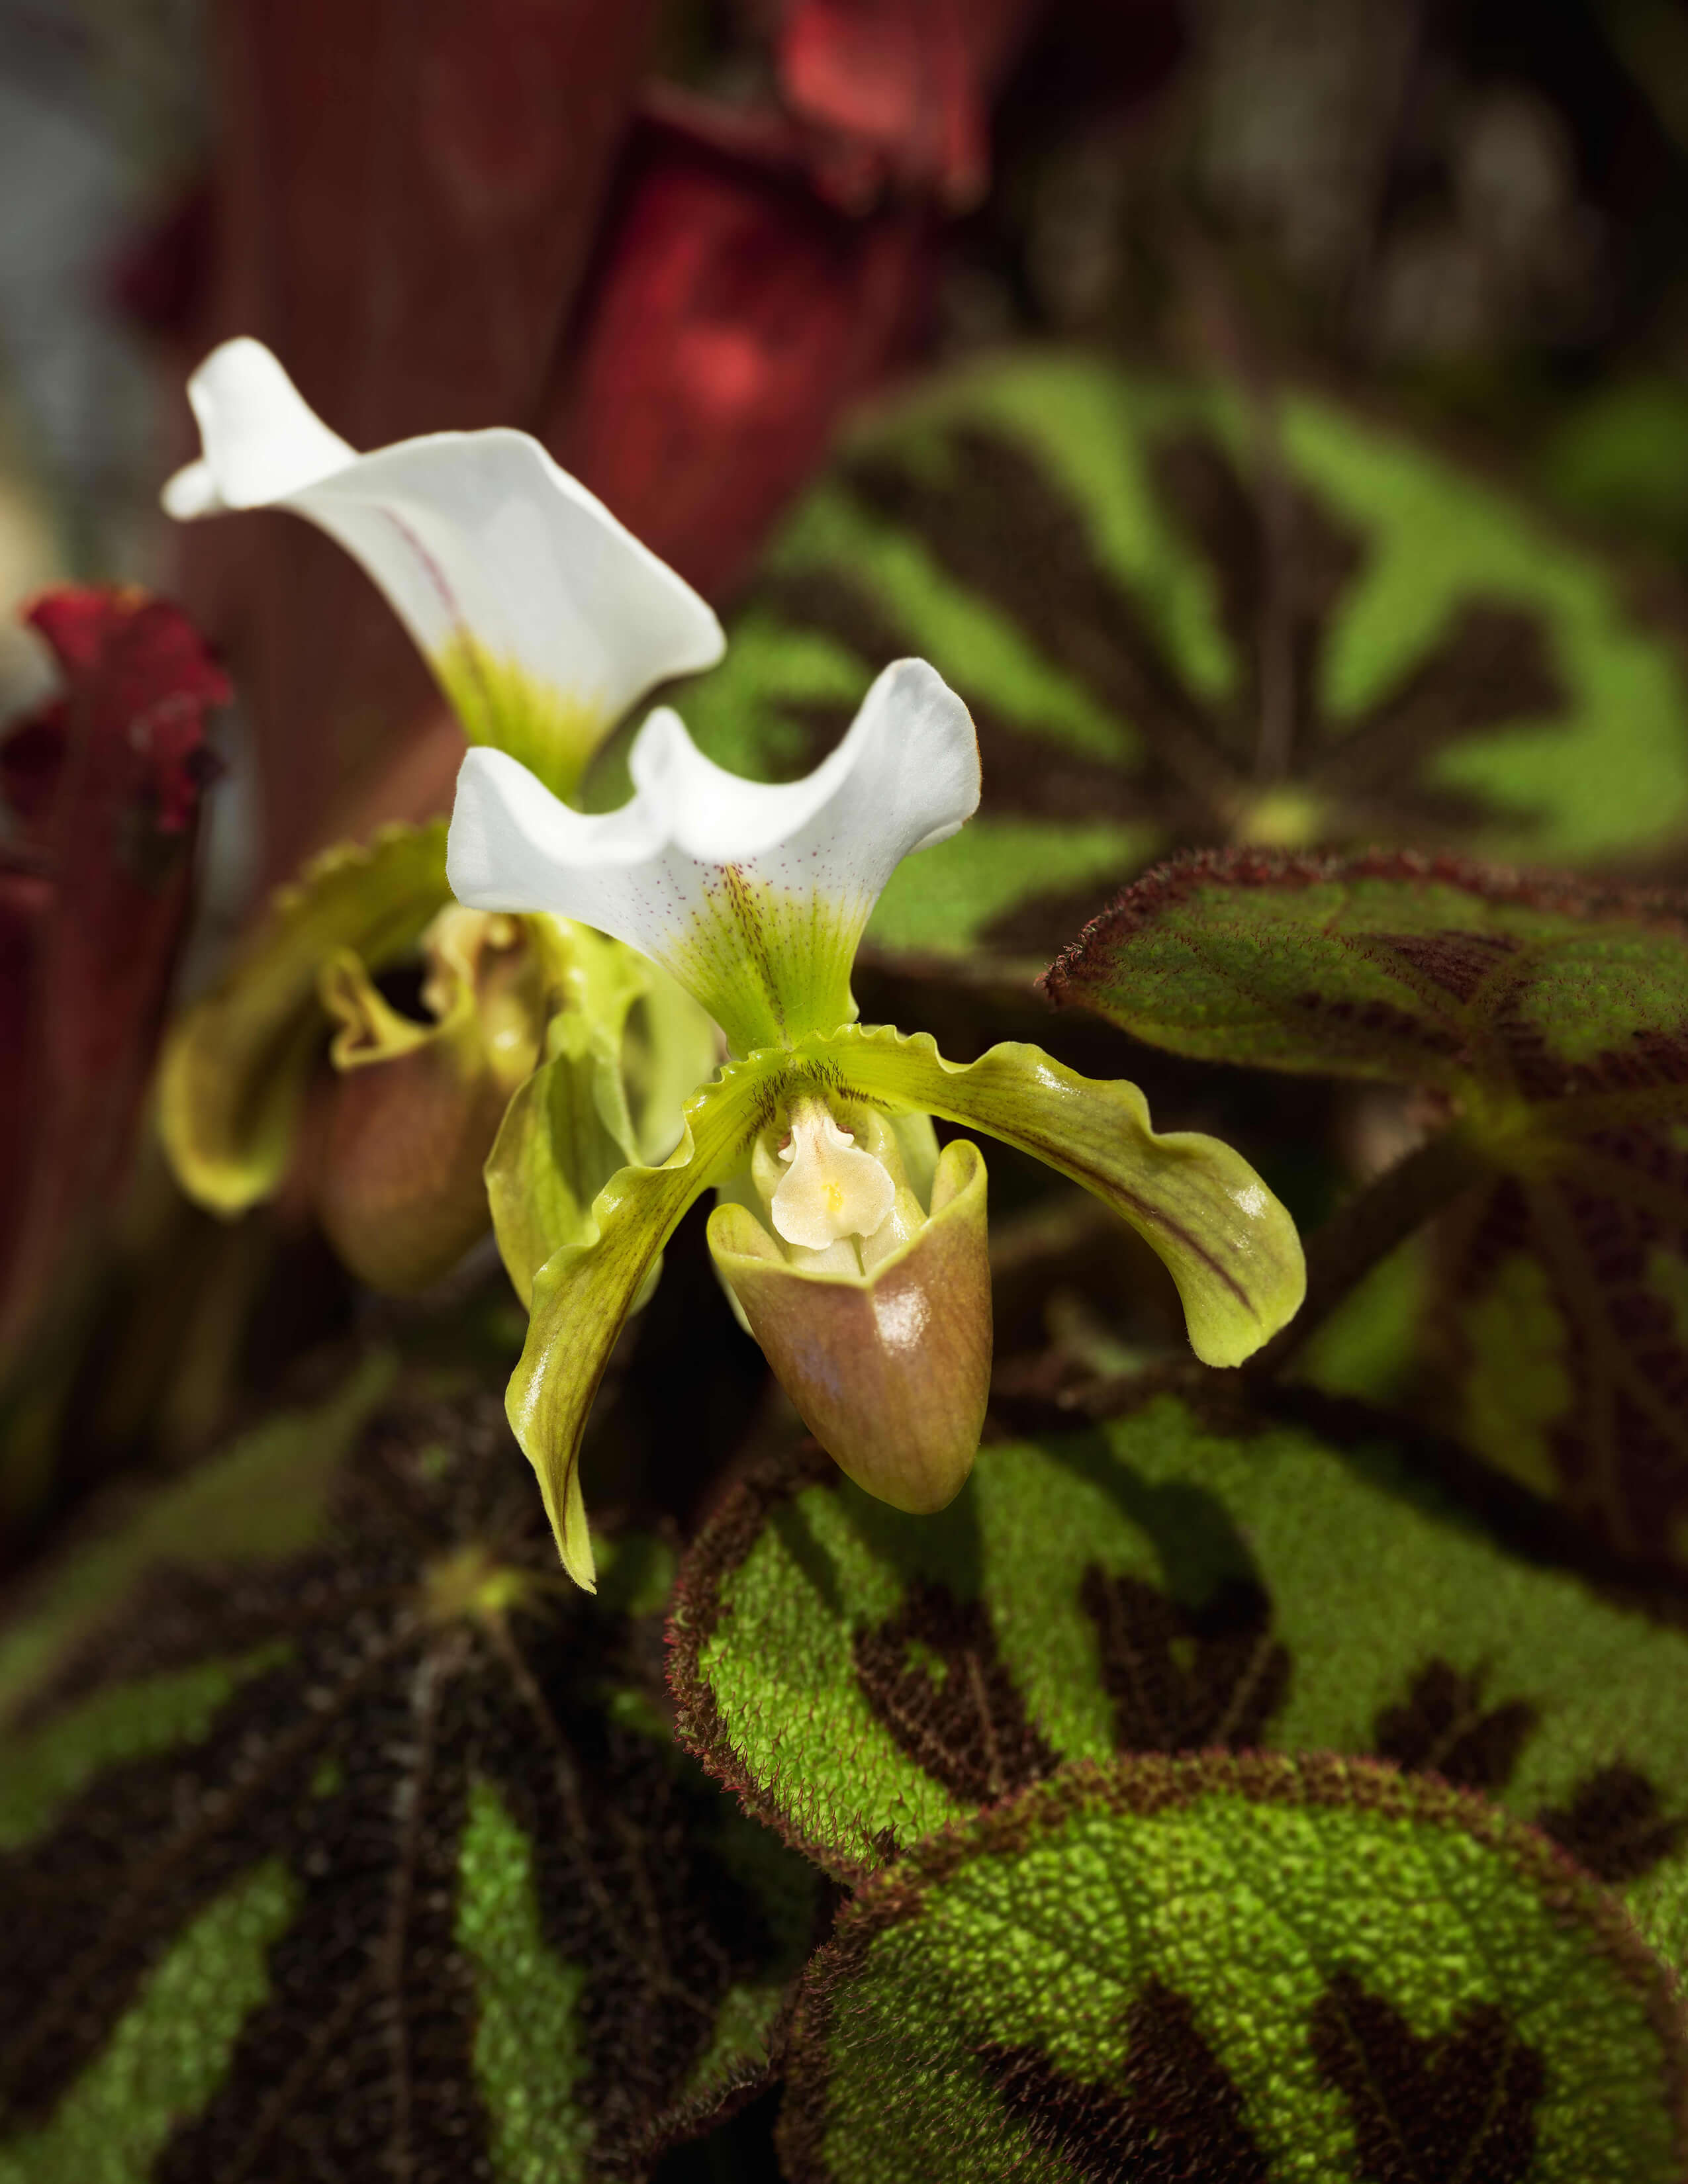 Paphiopedilum spicerianum - a kind of orchid with some white petals and some Begonia massoniana ‘Rock’.